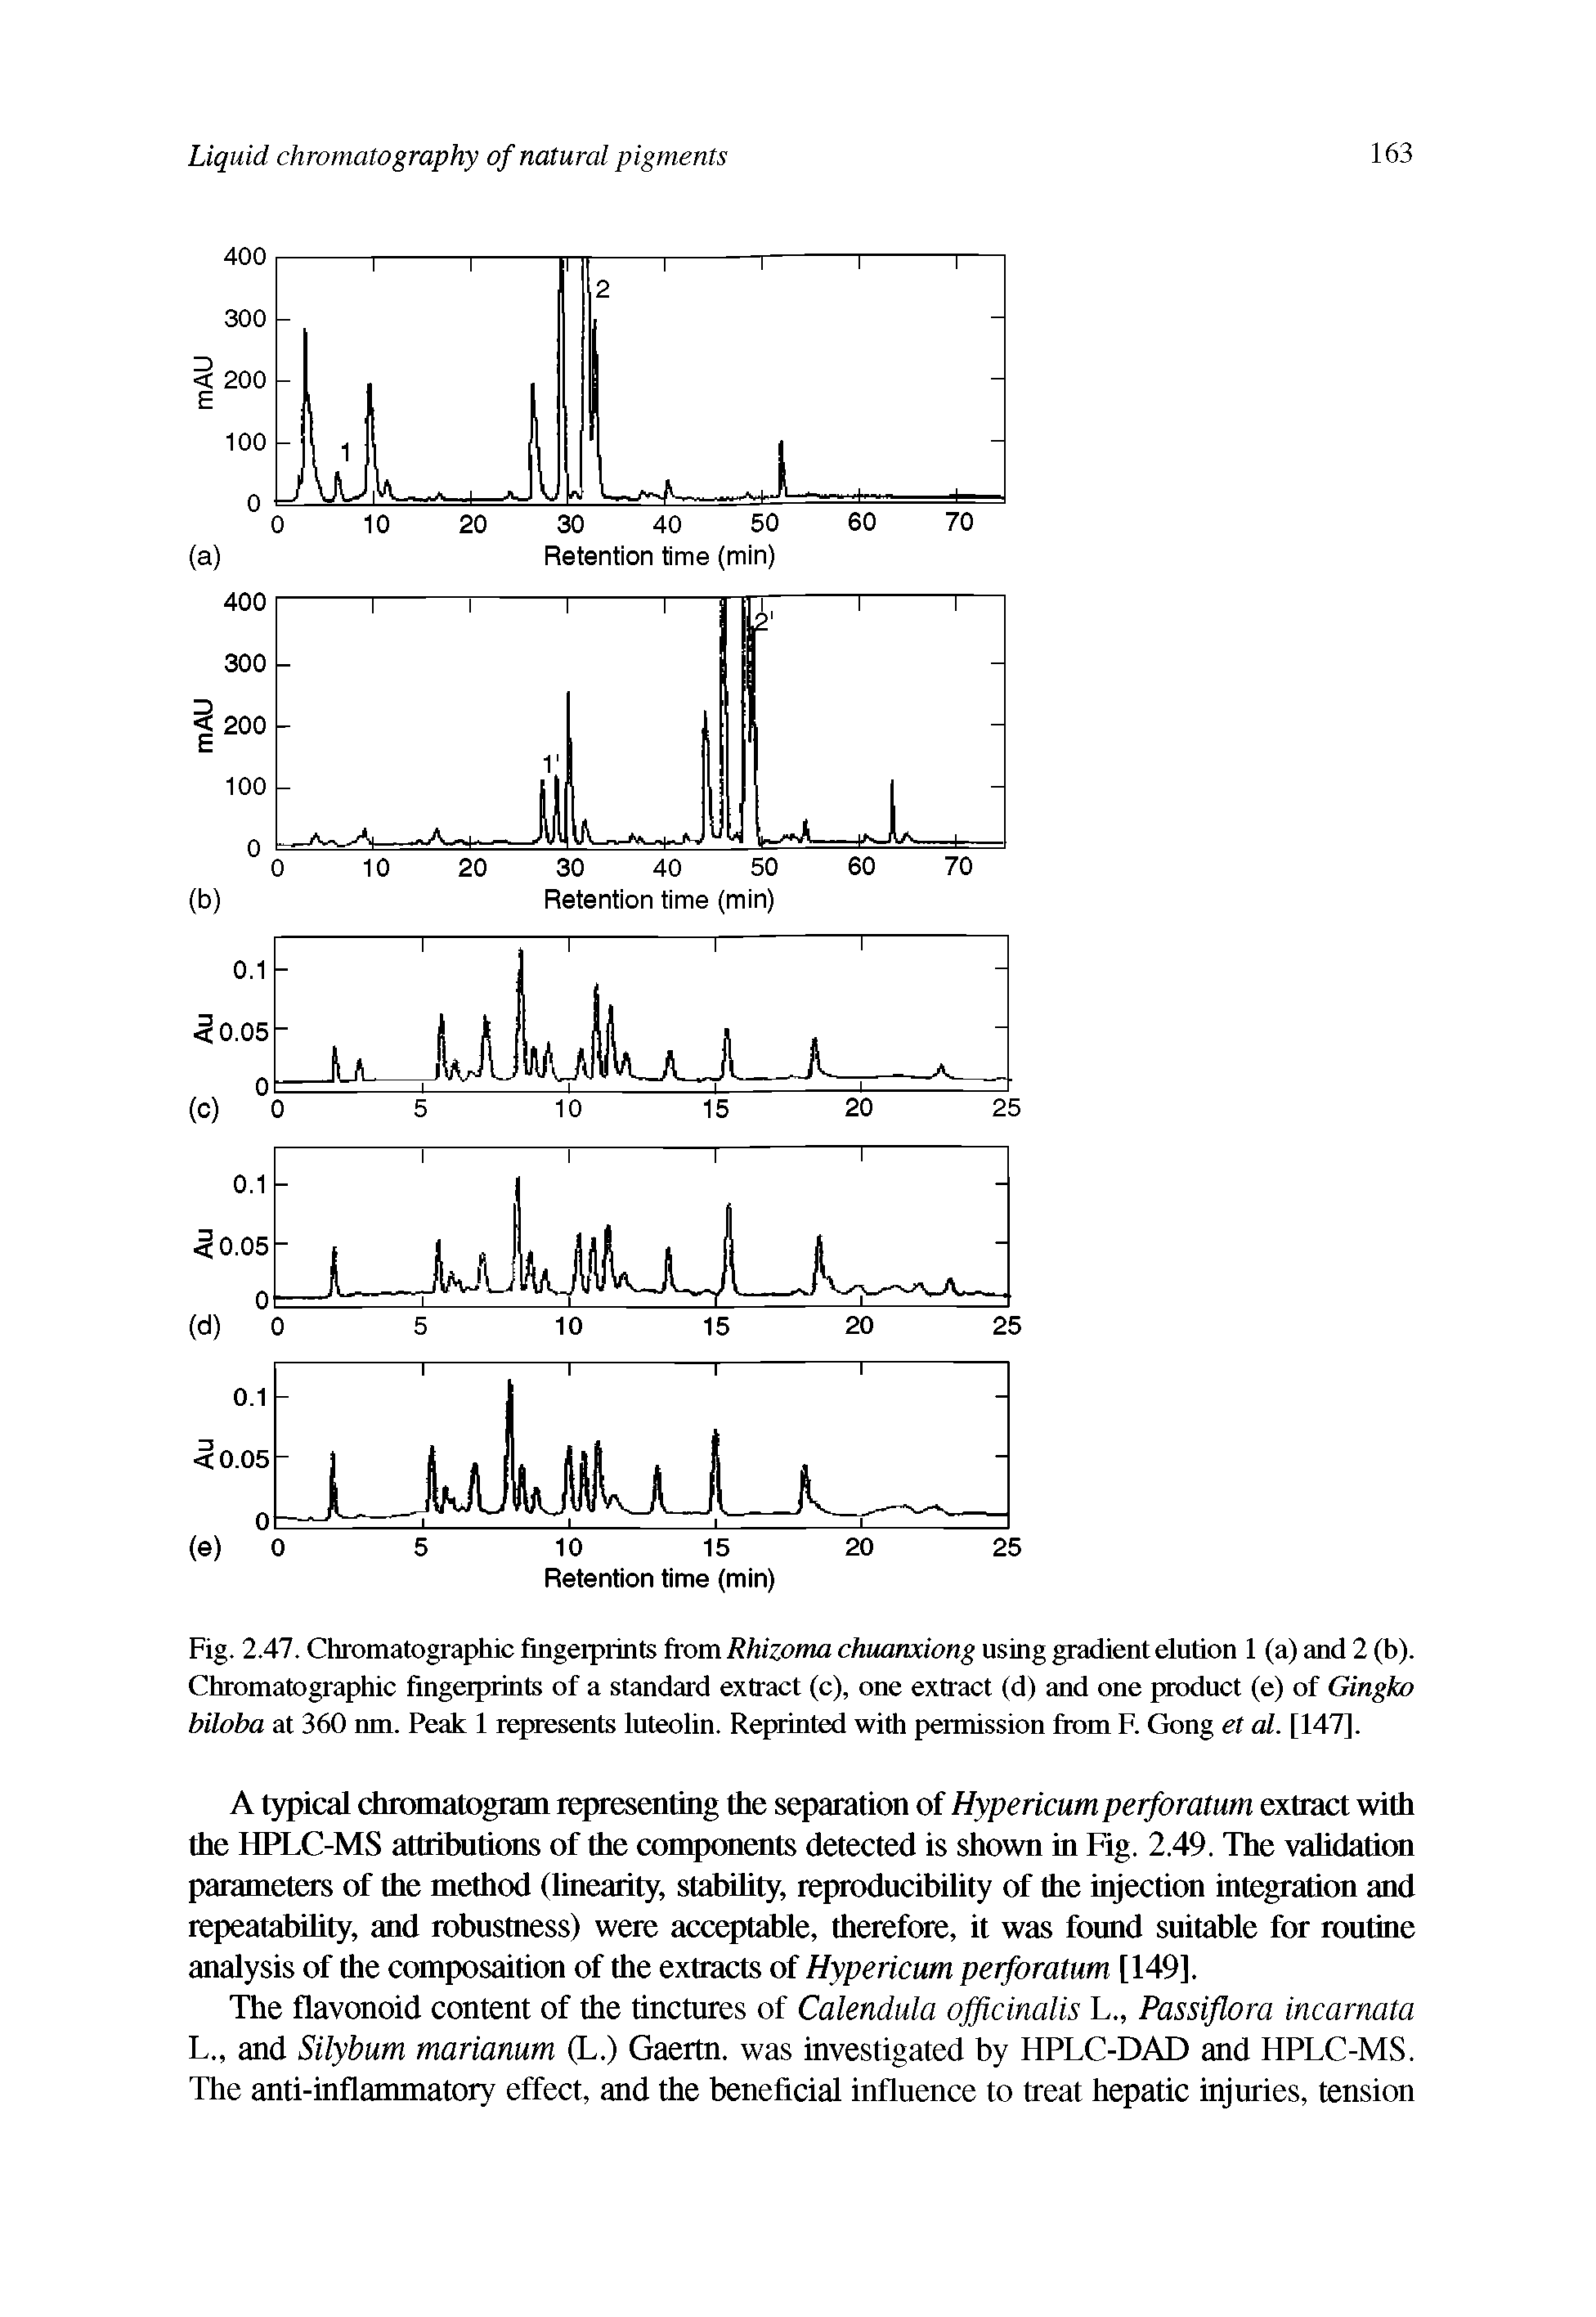 Fig. 2.47. Chromatographic fingerprints from Rhizoma chuanxiong using gradient elution 1 (a) and 2 (b). Chromatographic fingerprints of a standard extract (c), one extract (d) and one product (e) of Gingko biloba at 360 nm. Peak 1 represents luteolin. Reprinted with permission from F. Gong el al. [147].